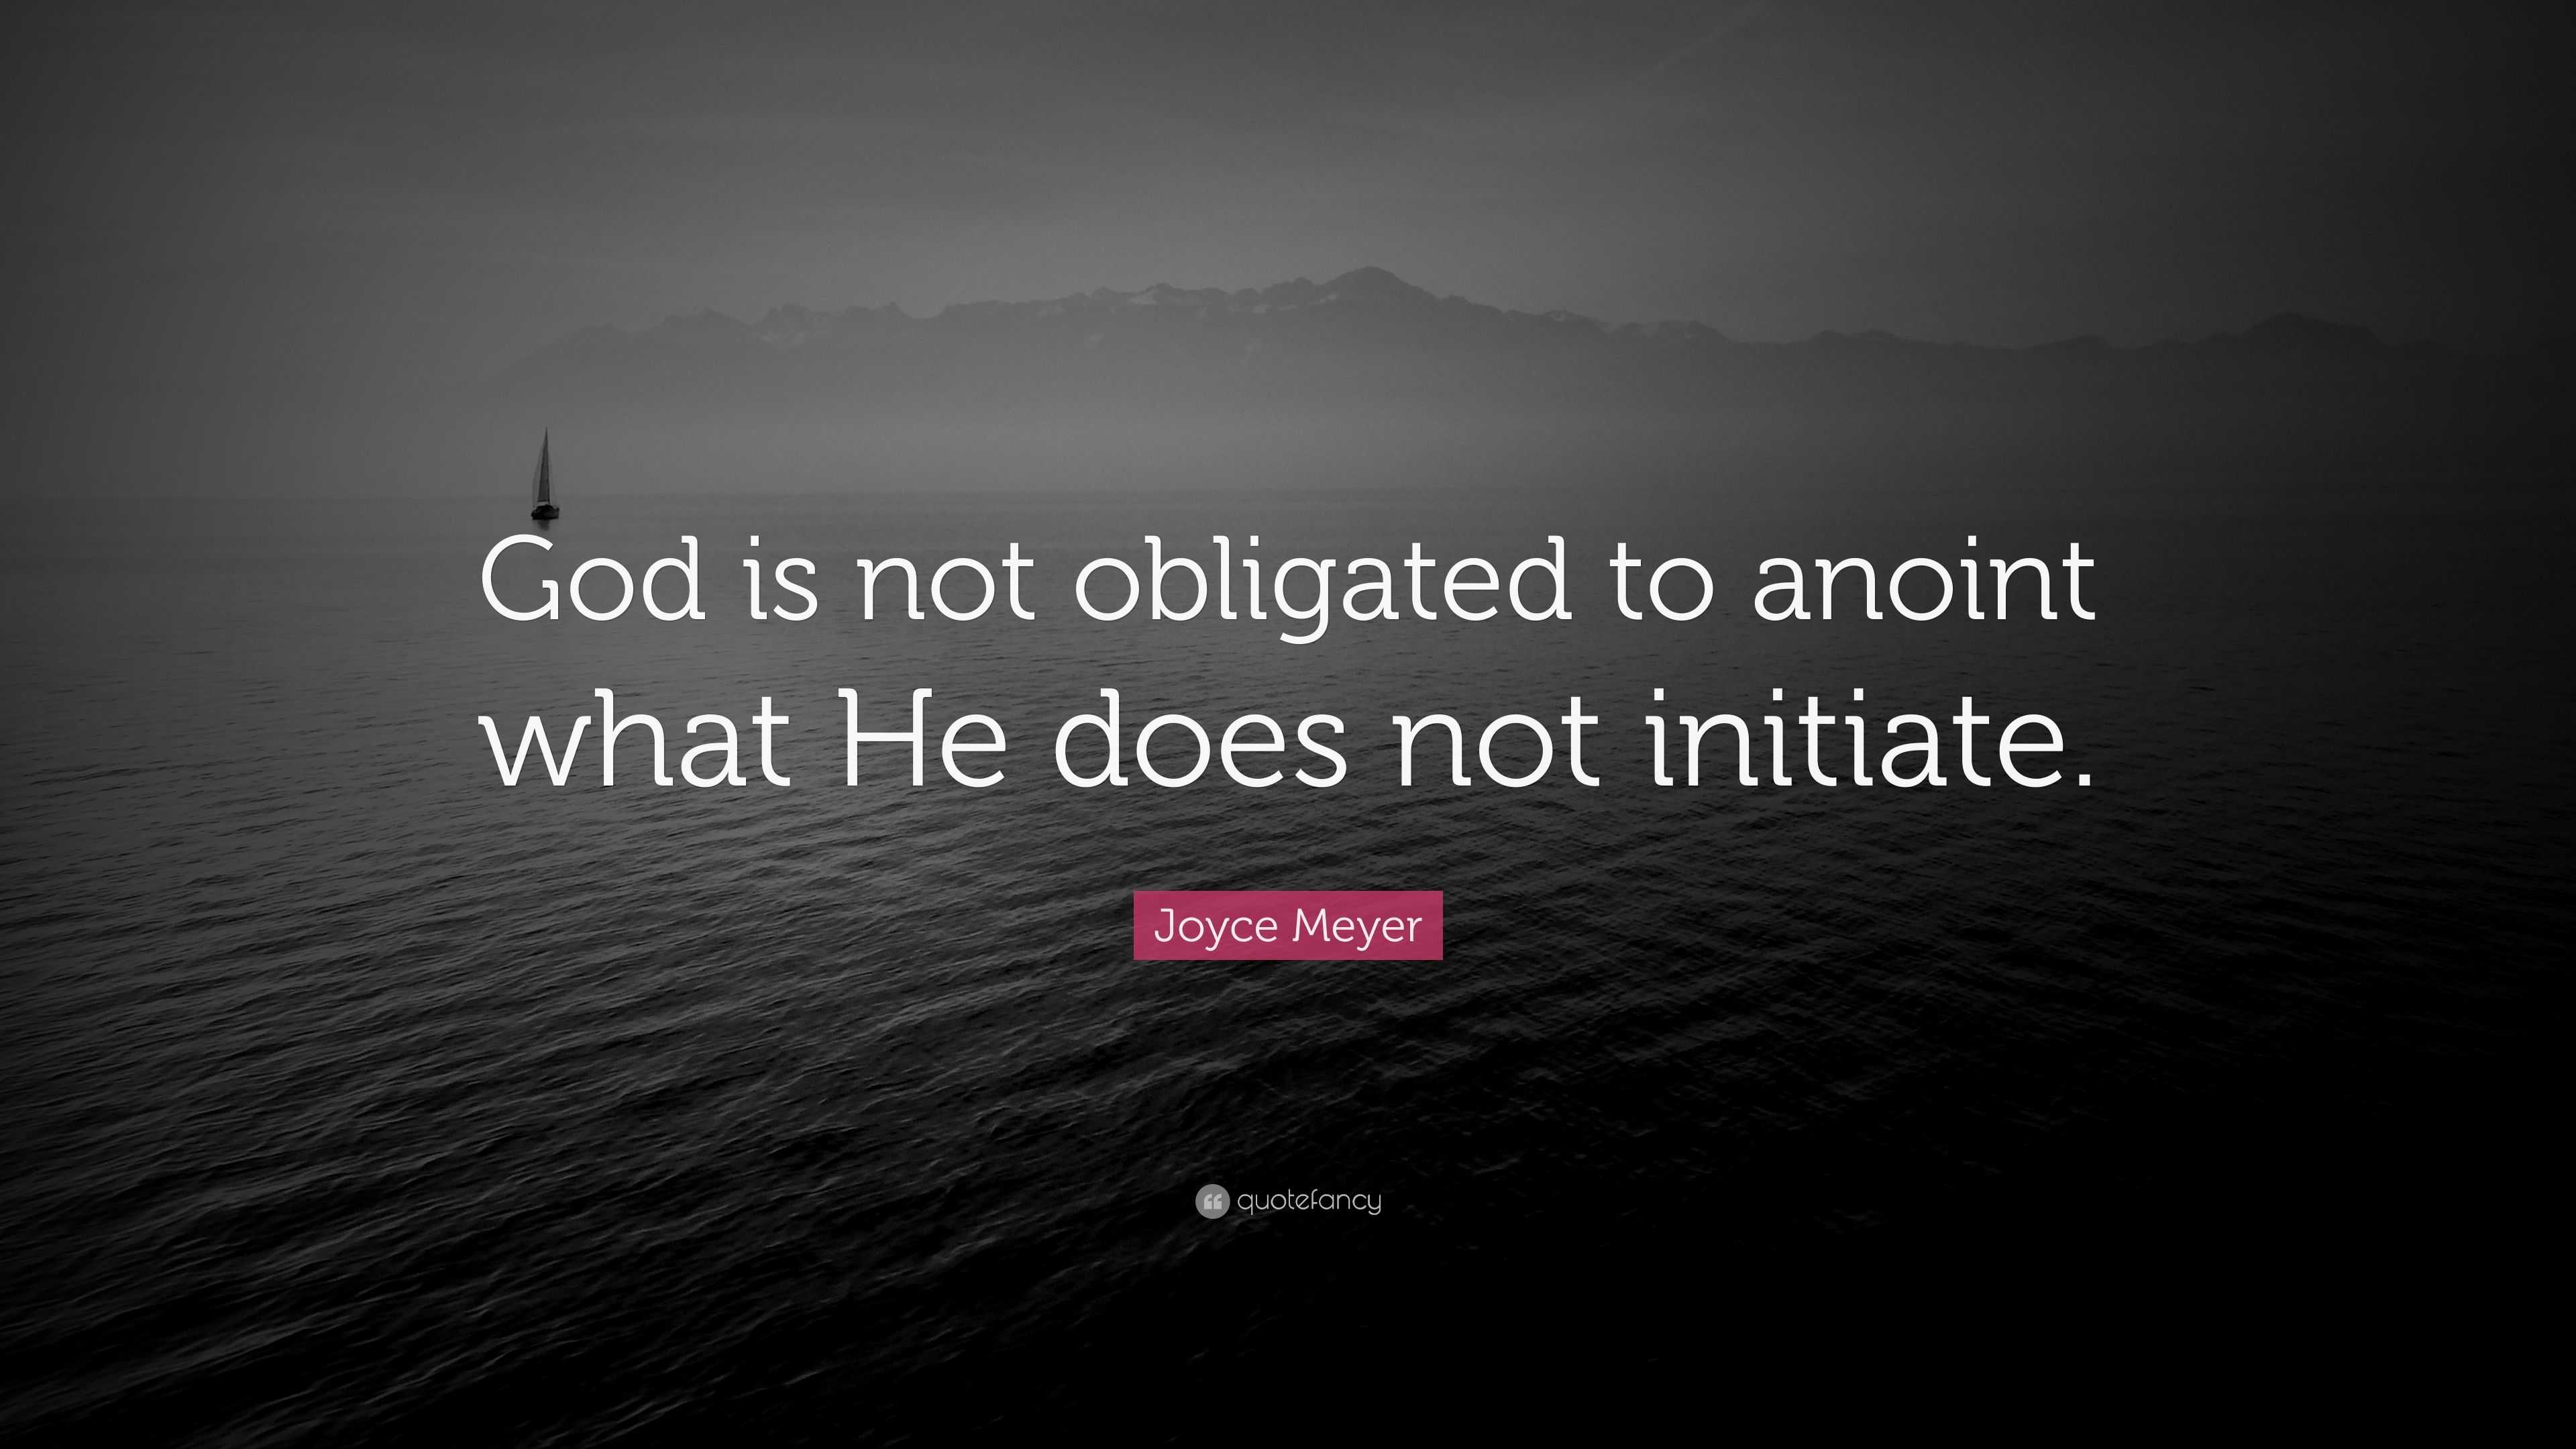 Joyce Meyer Quote: “God is not obligated to anoint what He does not ...